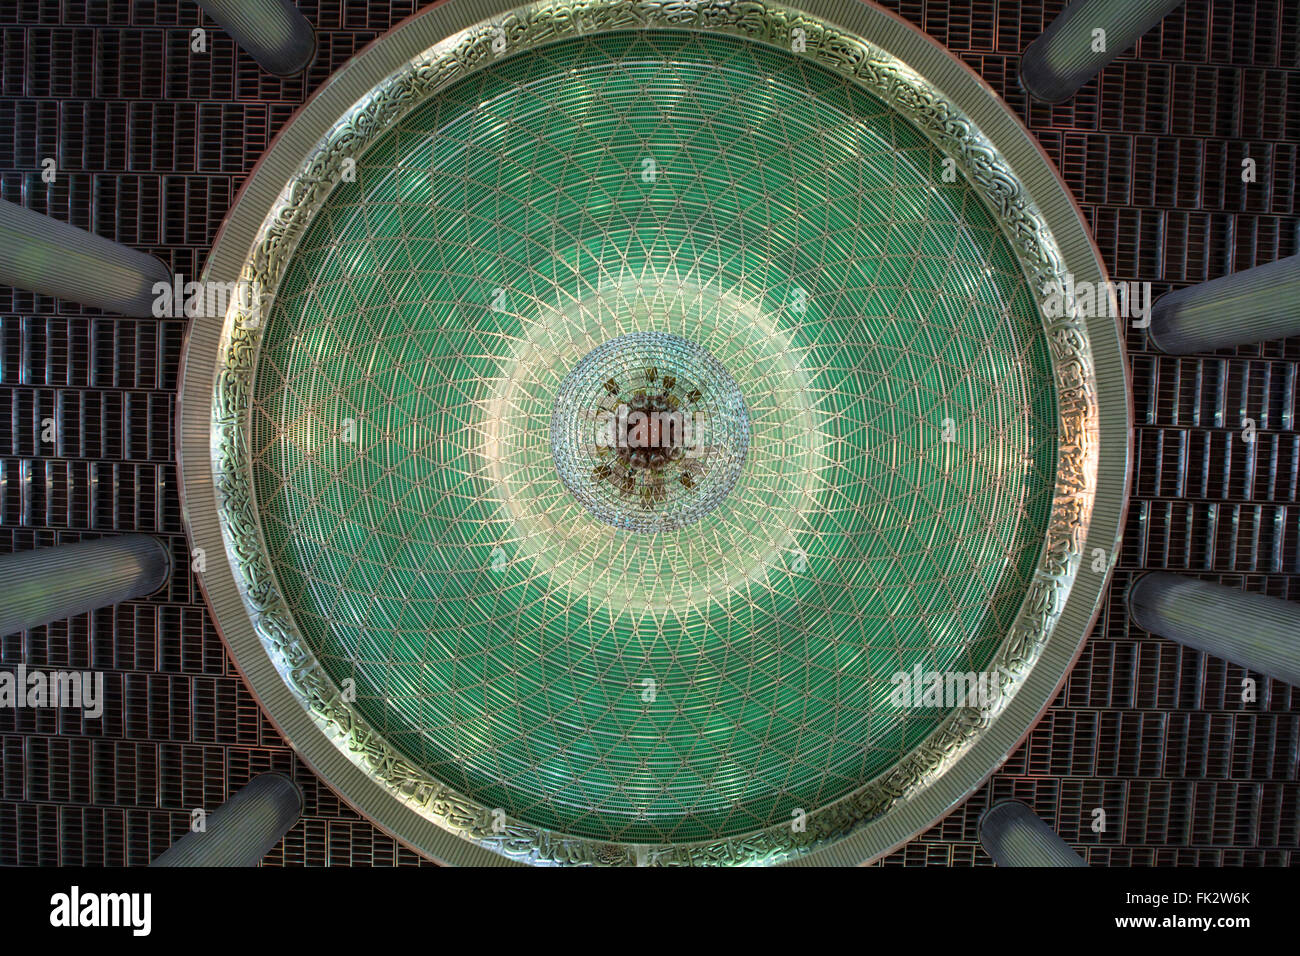 The dome of Istiqlal Mosque in Jakarta, Indonesia Stock Photo